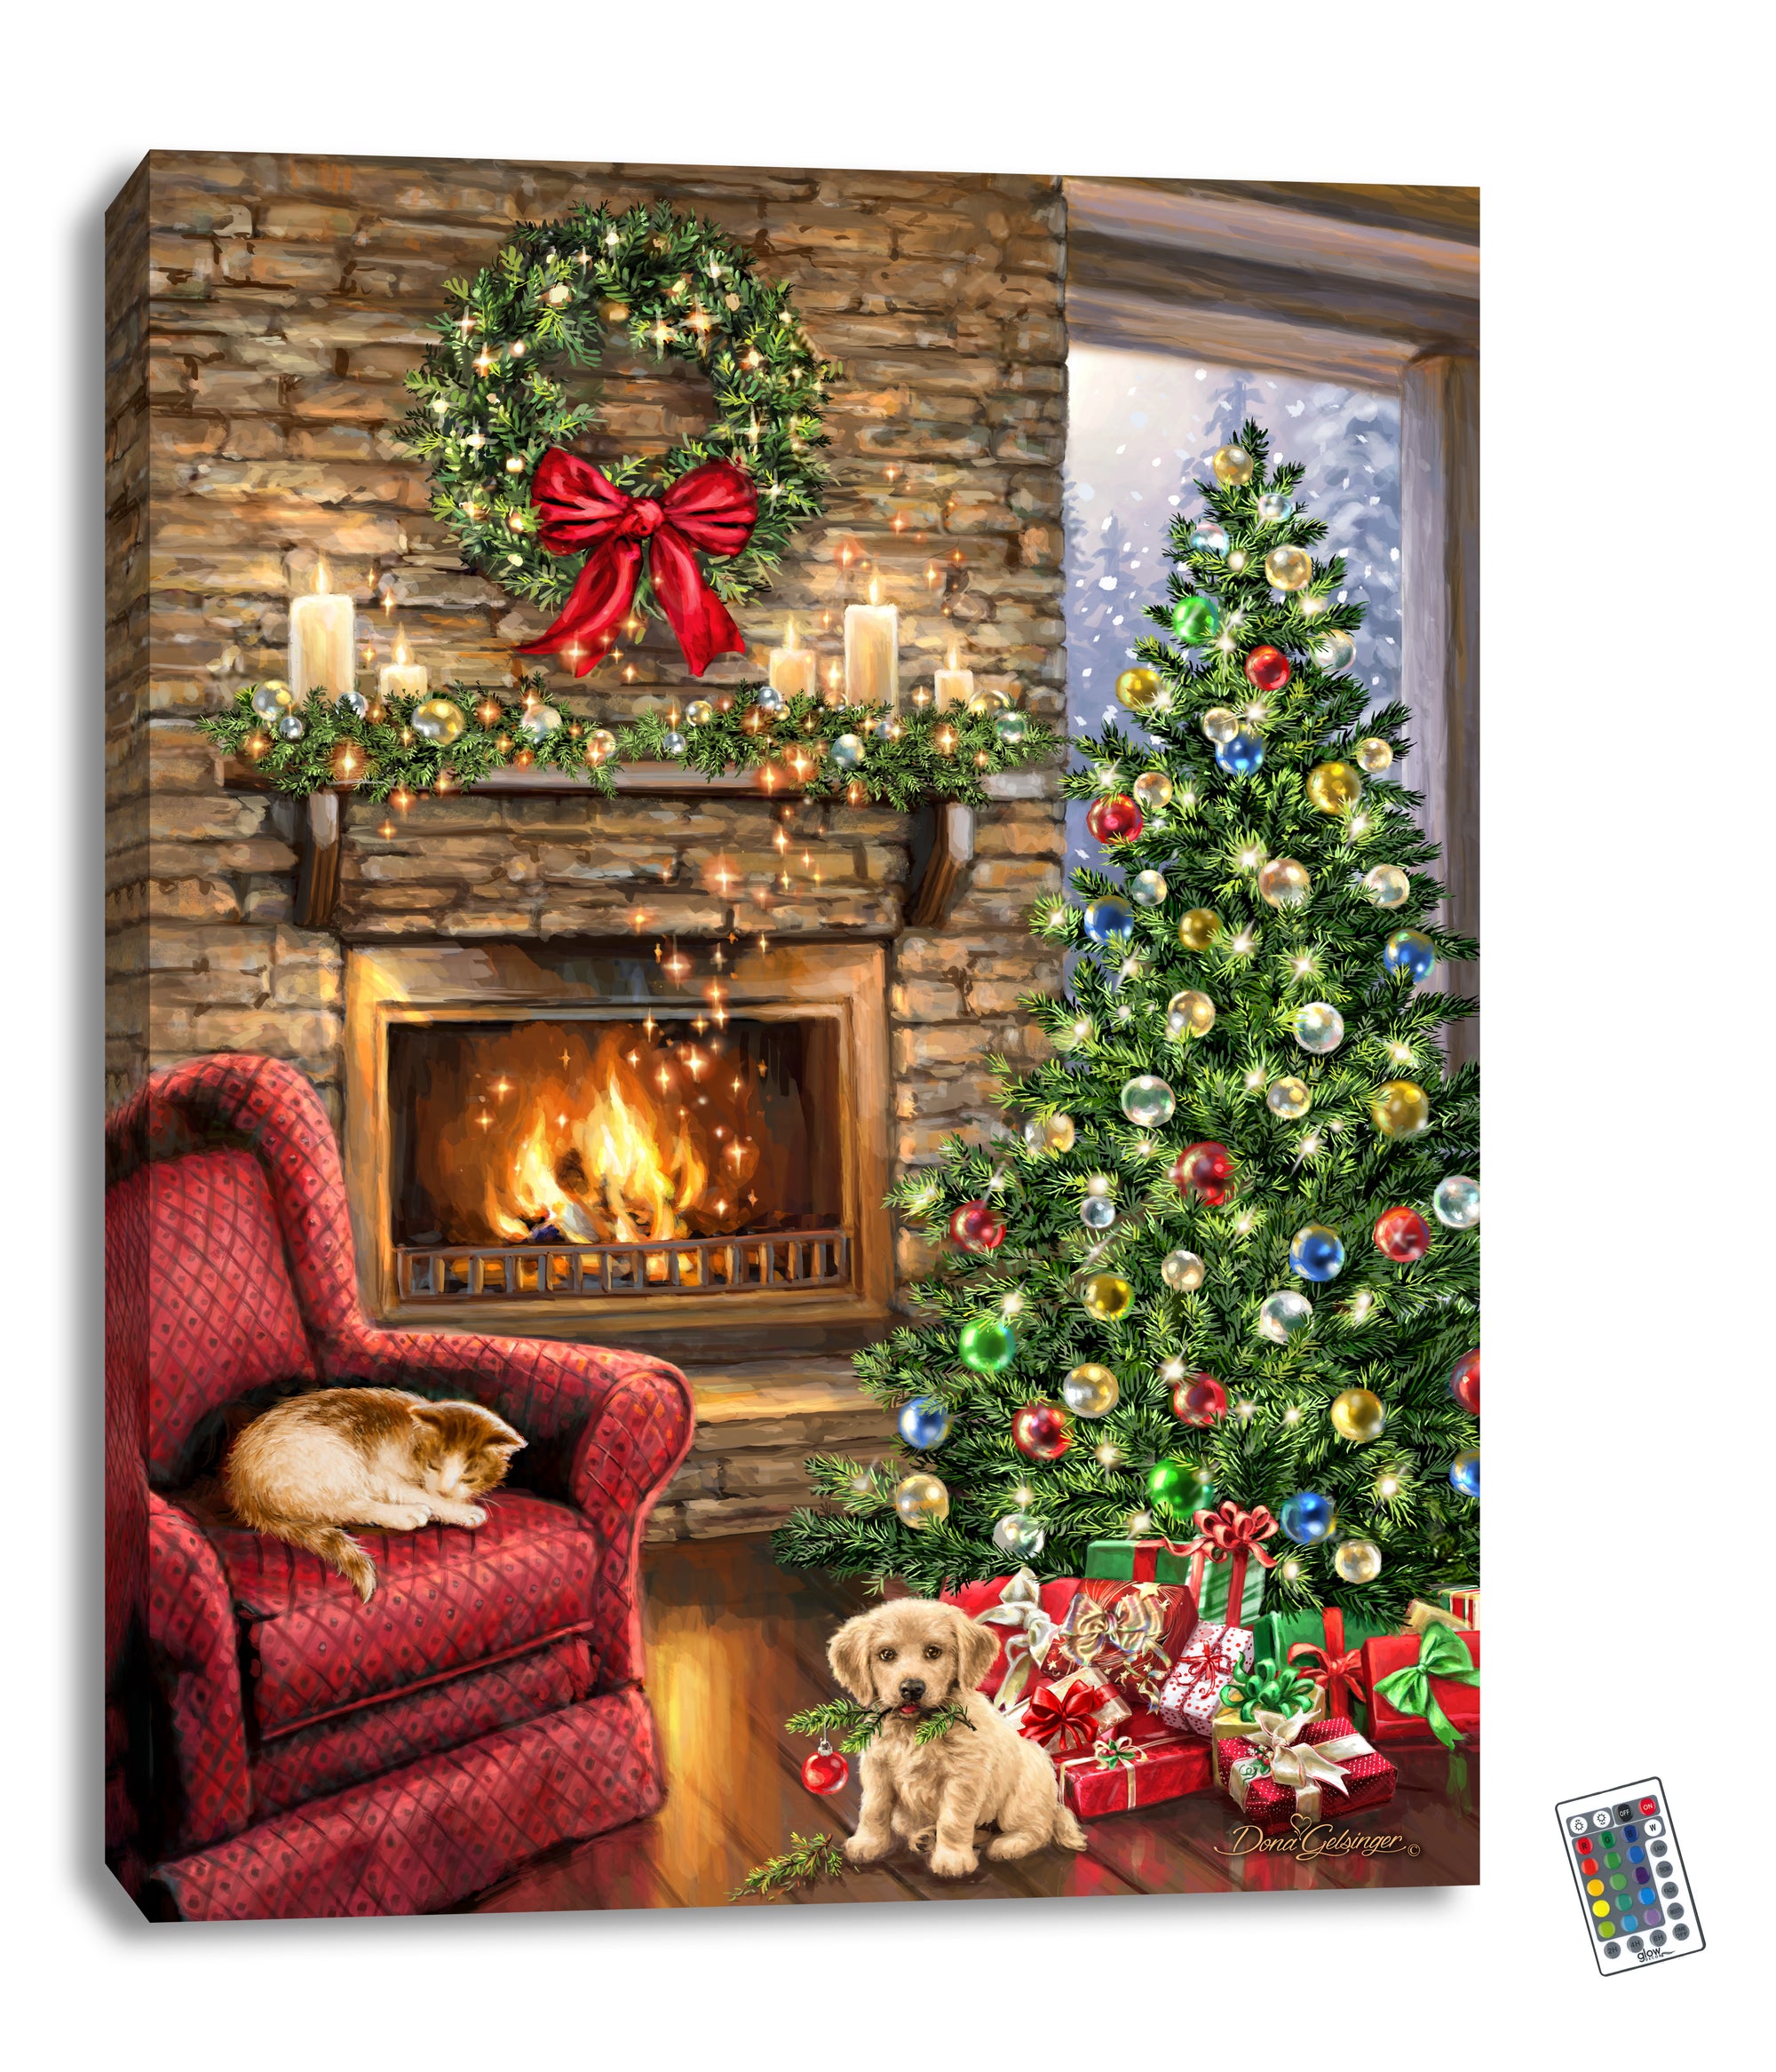 With its stunning depiction of a magical Christmas living room, this piece is the perfect addition to your festive decor.  The beautiful, fully illuminated Christmas tree takes center stage, adorned with sparkling ornaments and twinkling lights. Above it, a wreath and garland provide the perfect finishing touches to the room's holiday decor. And what's Christmas without presents?